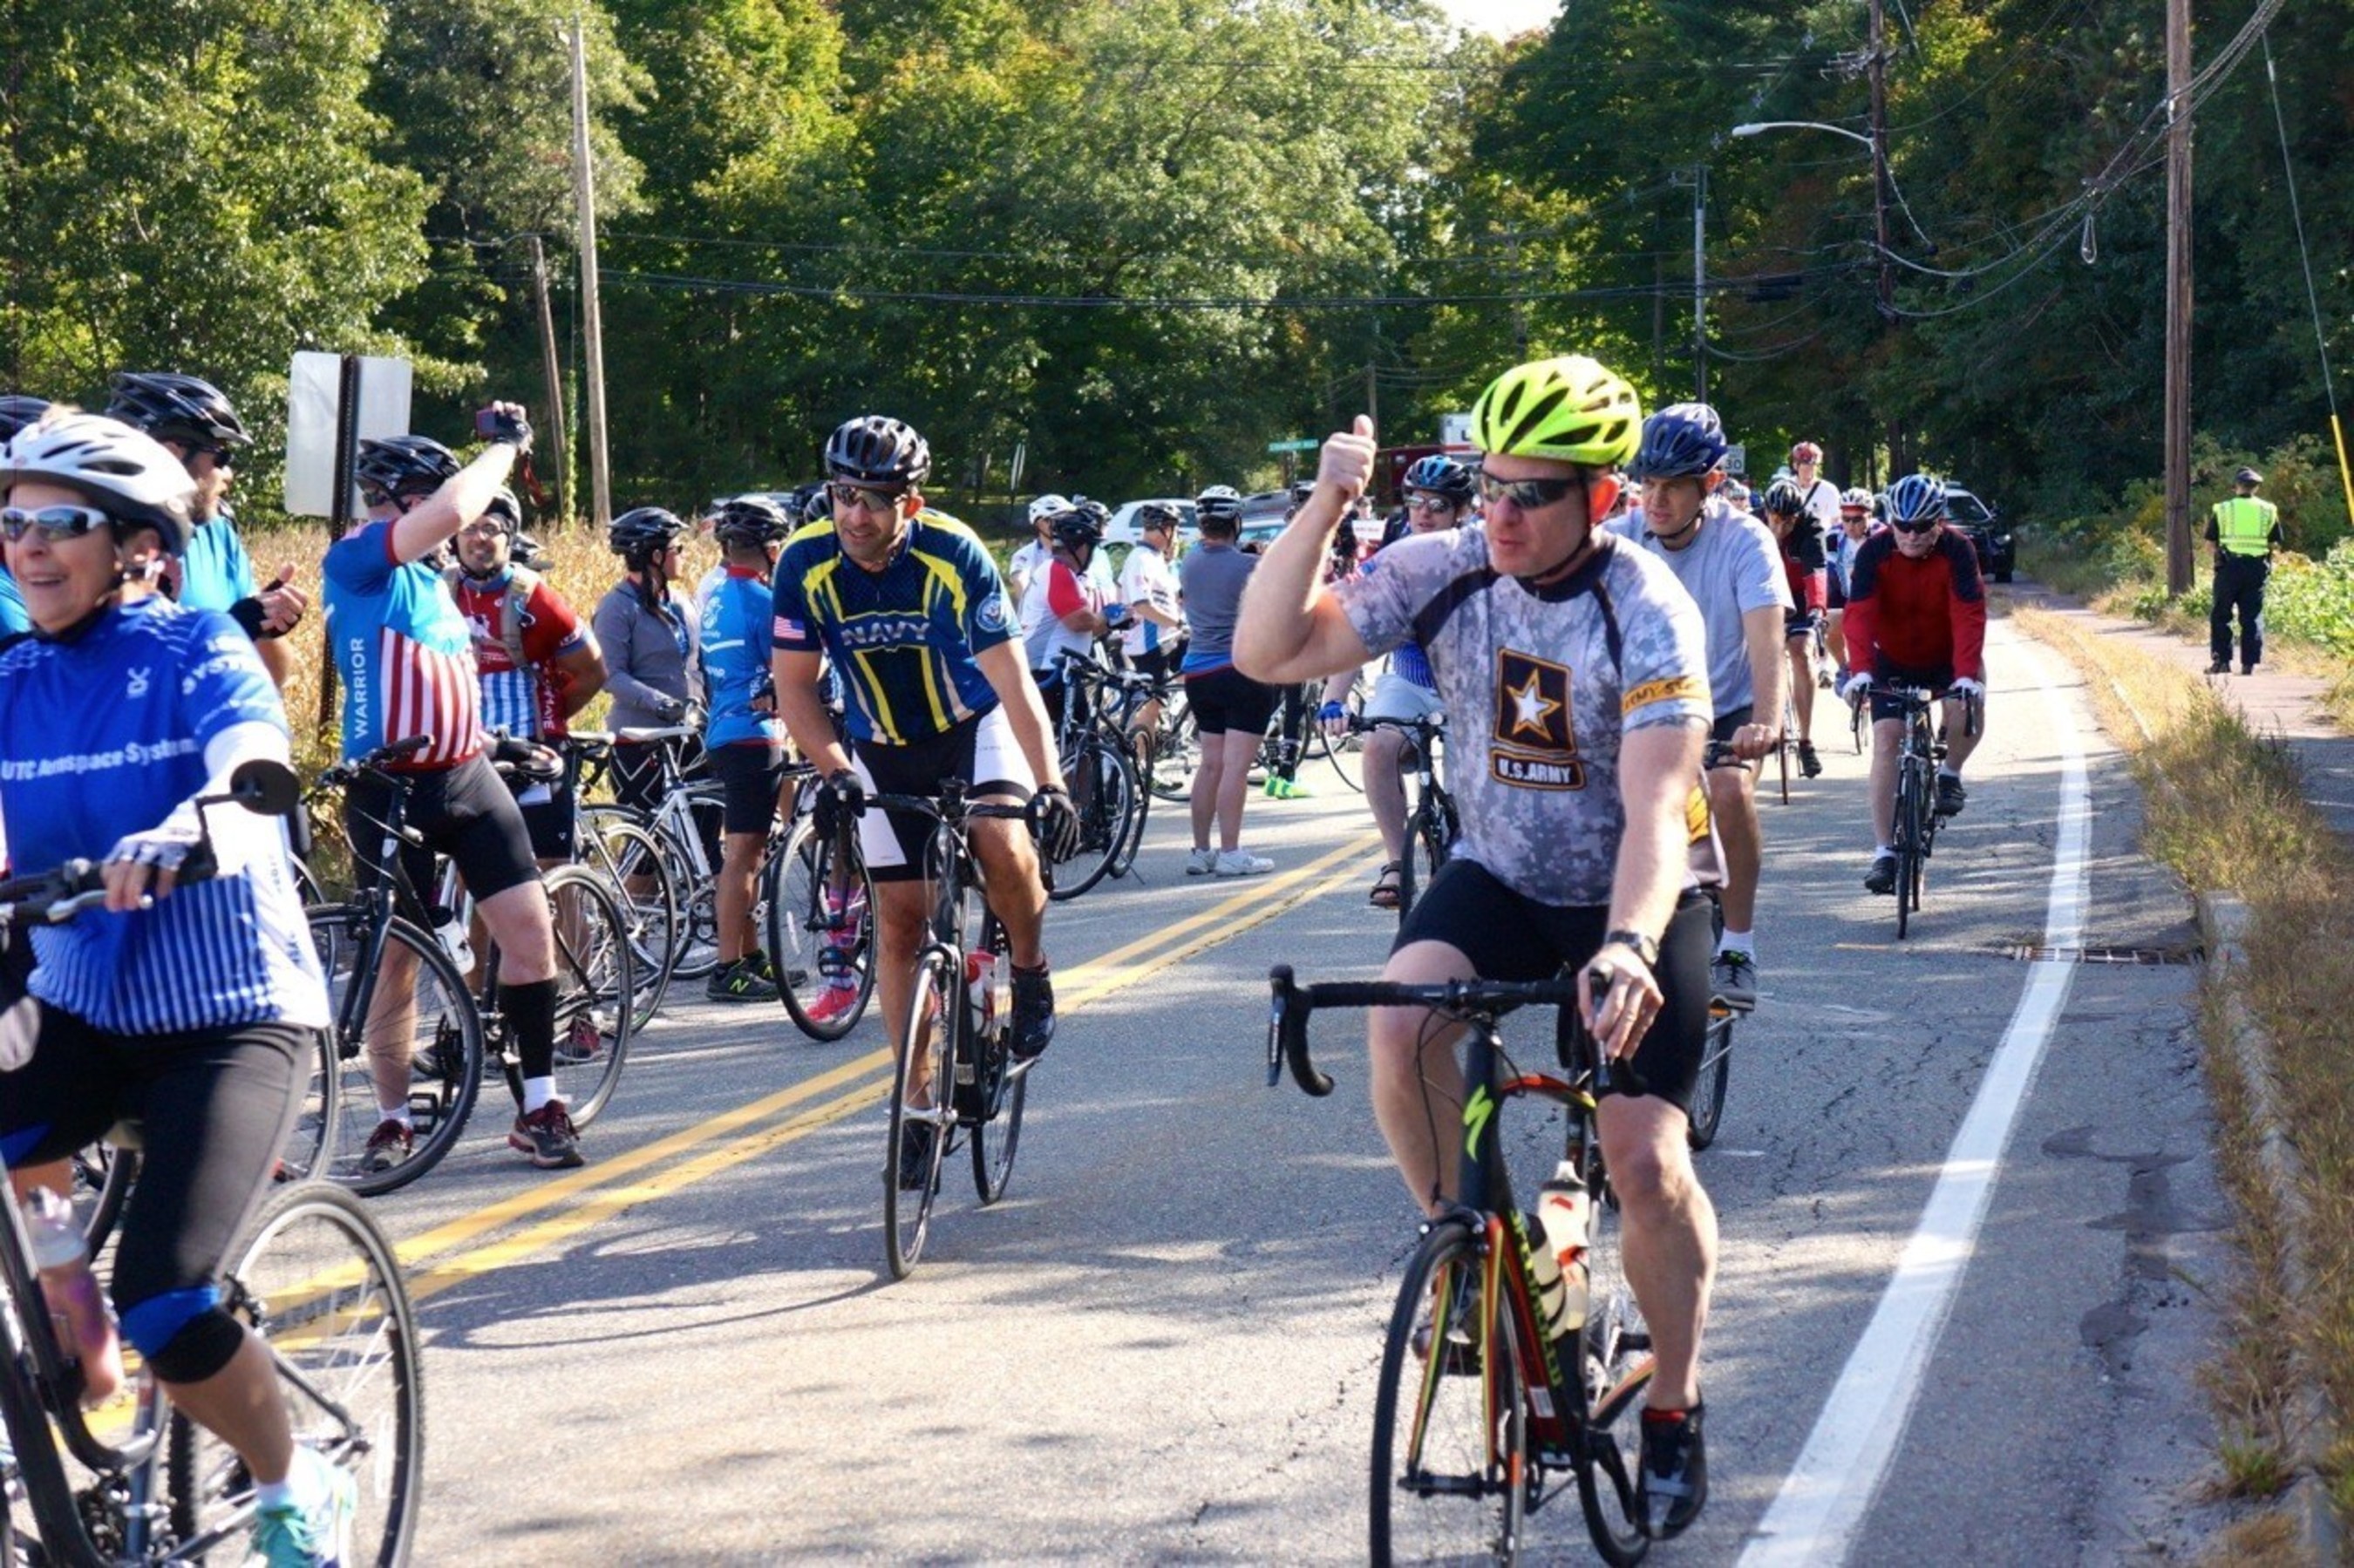 WWP supporters wave as they participate in a Soldier Ride Community Ride event.